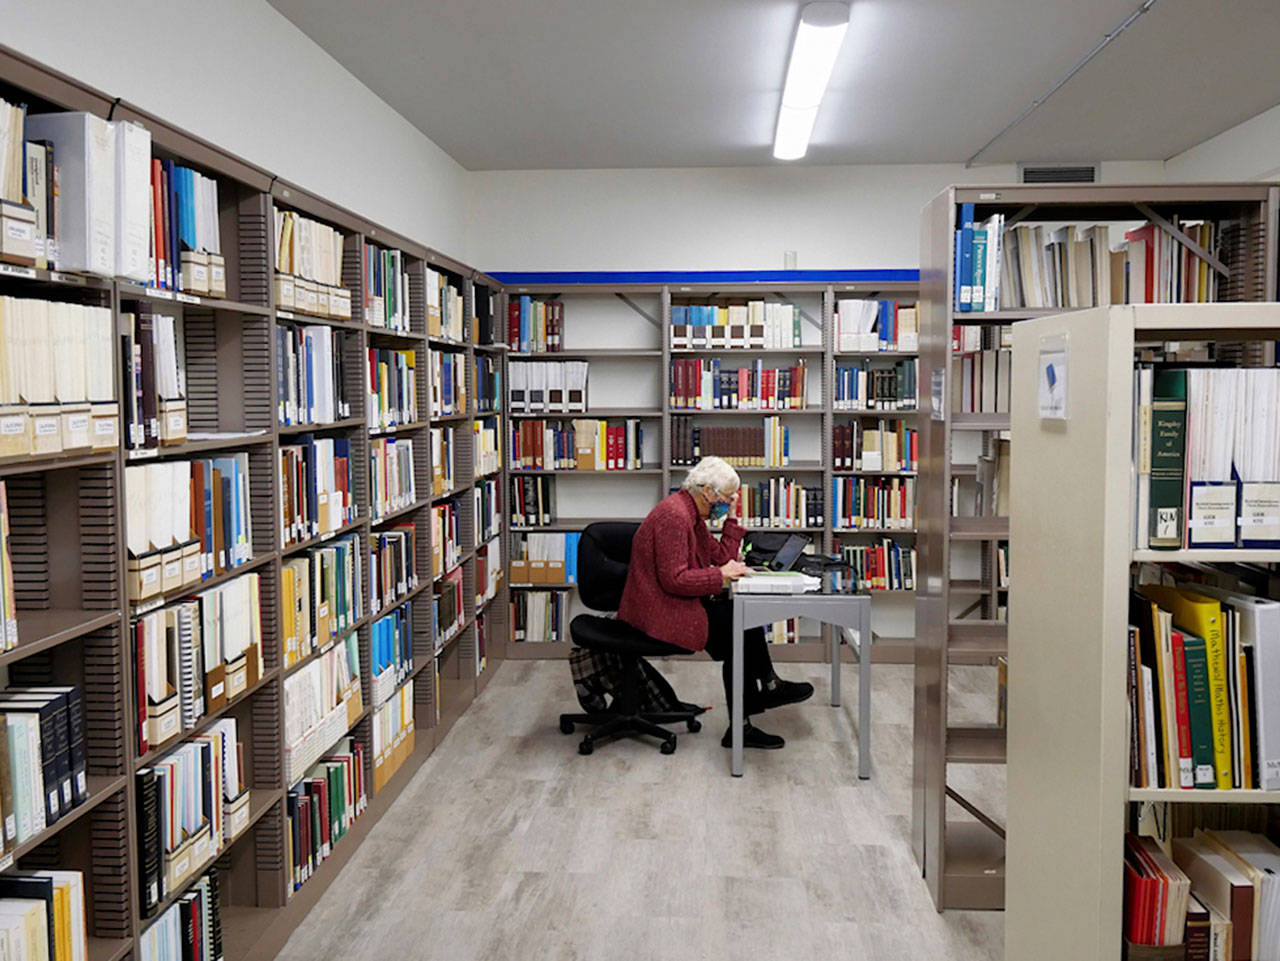 The Clallam County Genealogical Society’s new facility in Port Angeles isn’t open to public use yet, but offers space for eight to 10 people to conduct research via a library, computer terminals for online research, a large meeting room and more. Photo courtesy of Clallam County Genealogical Society